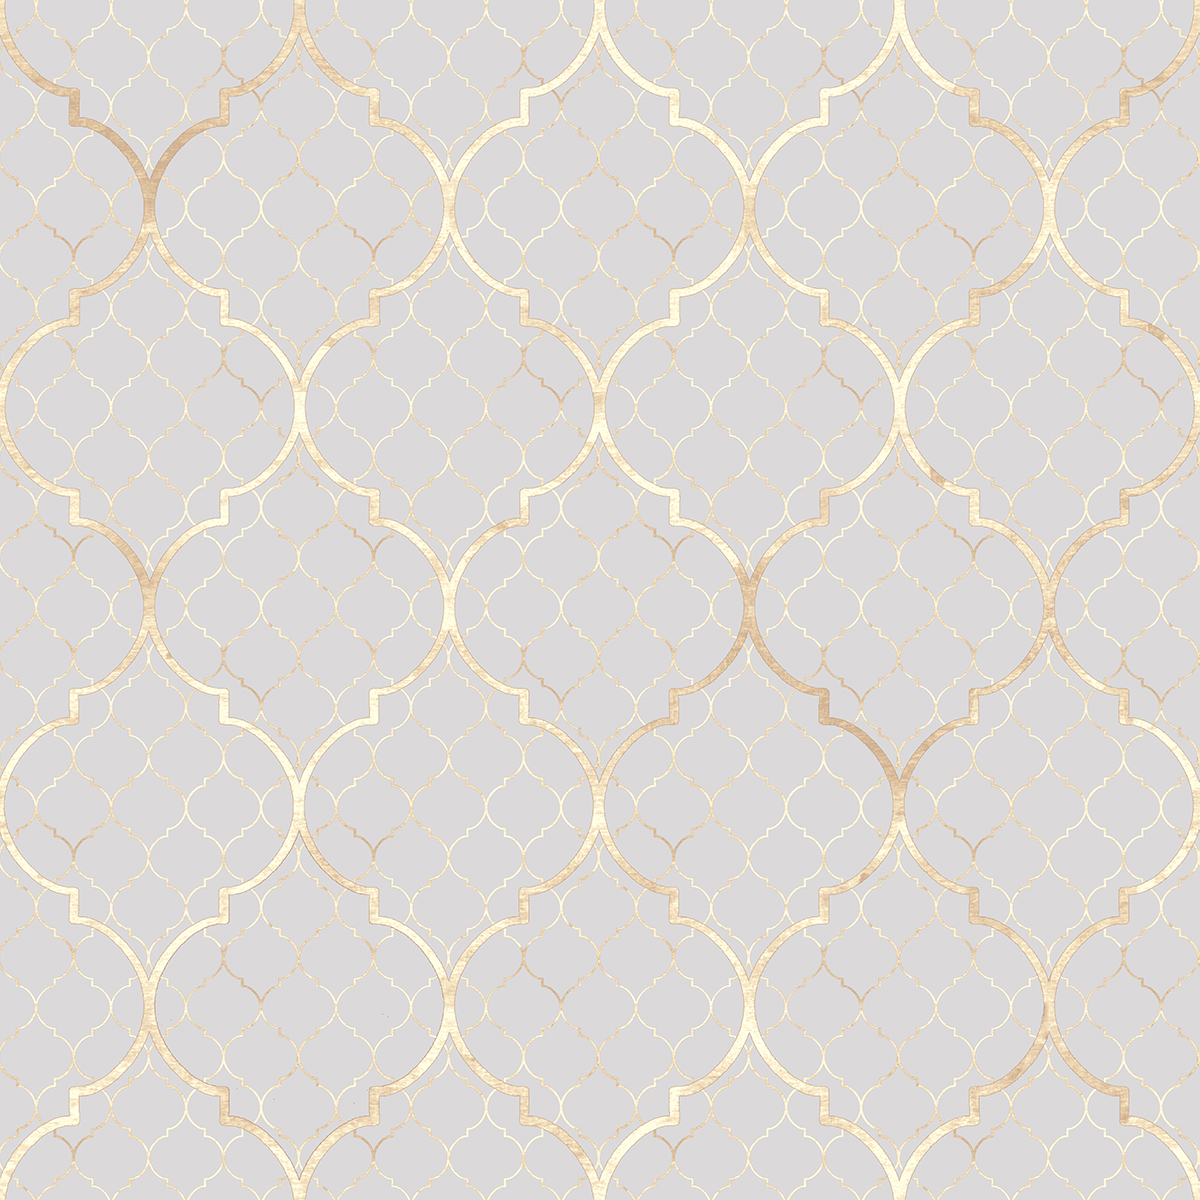 A white and gold patterned wallpaper